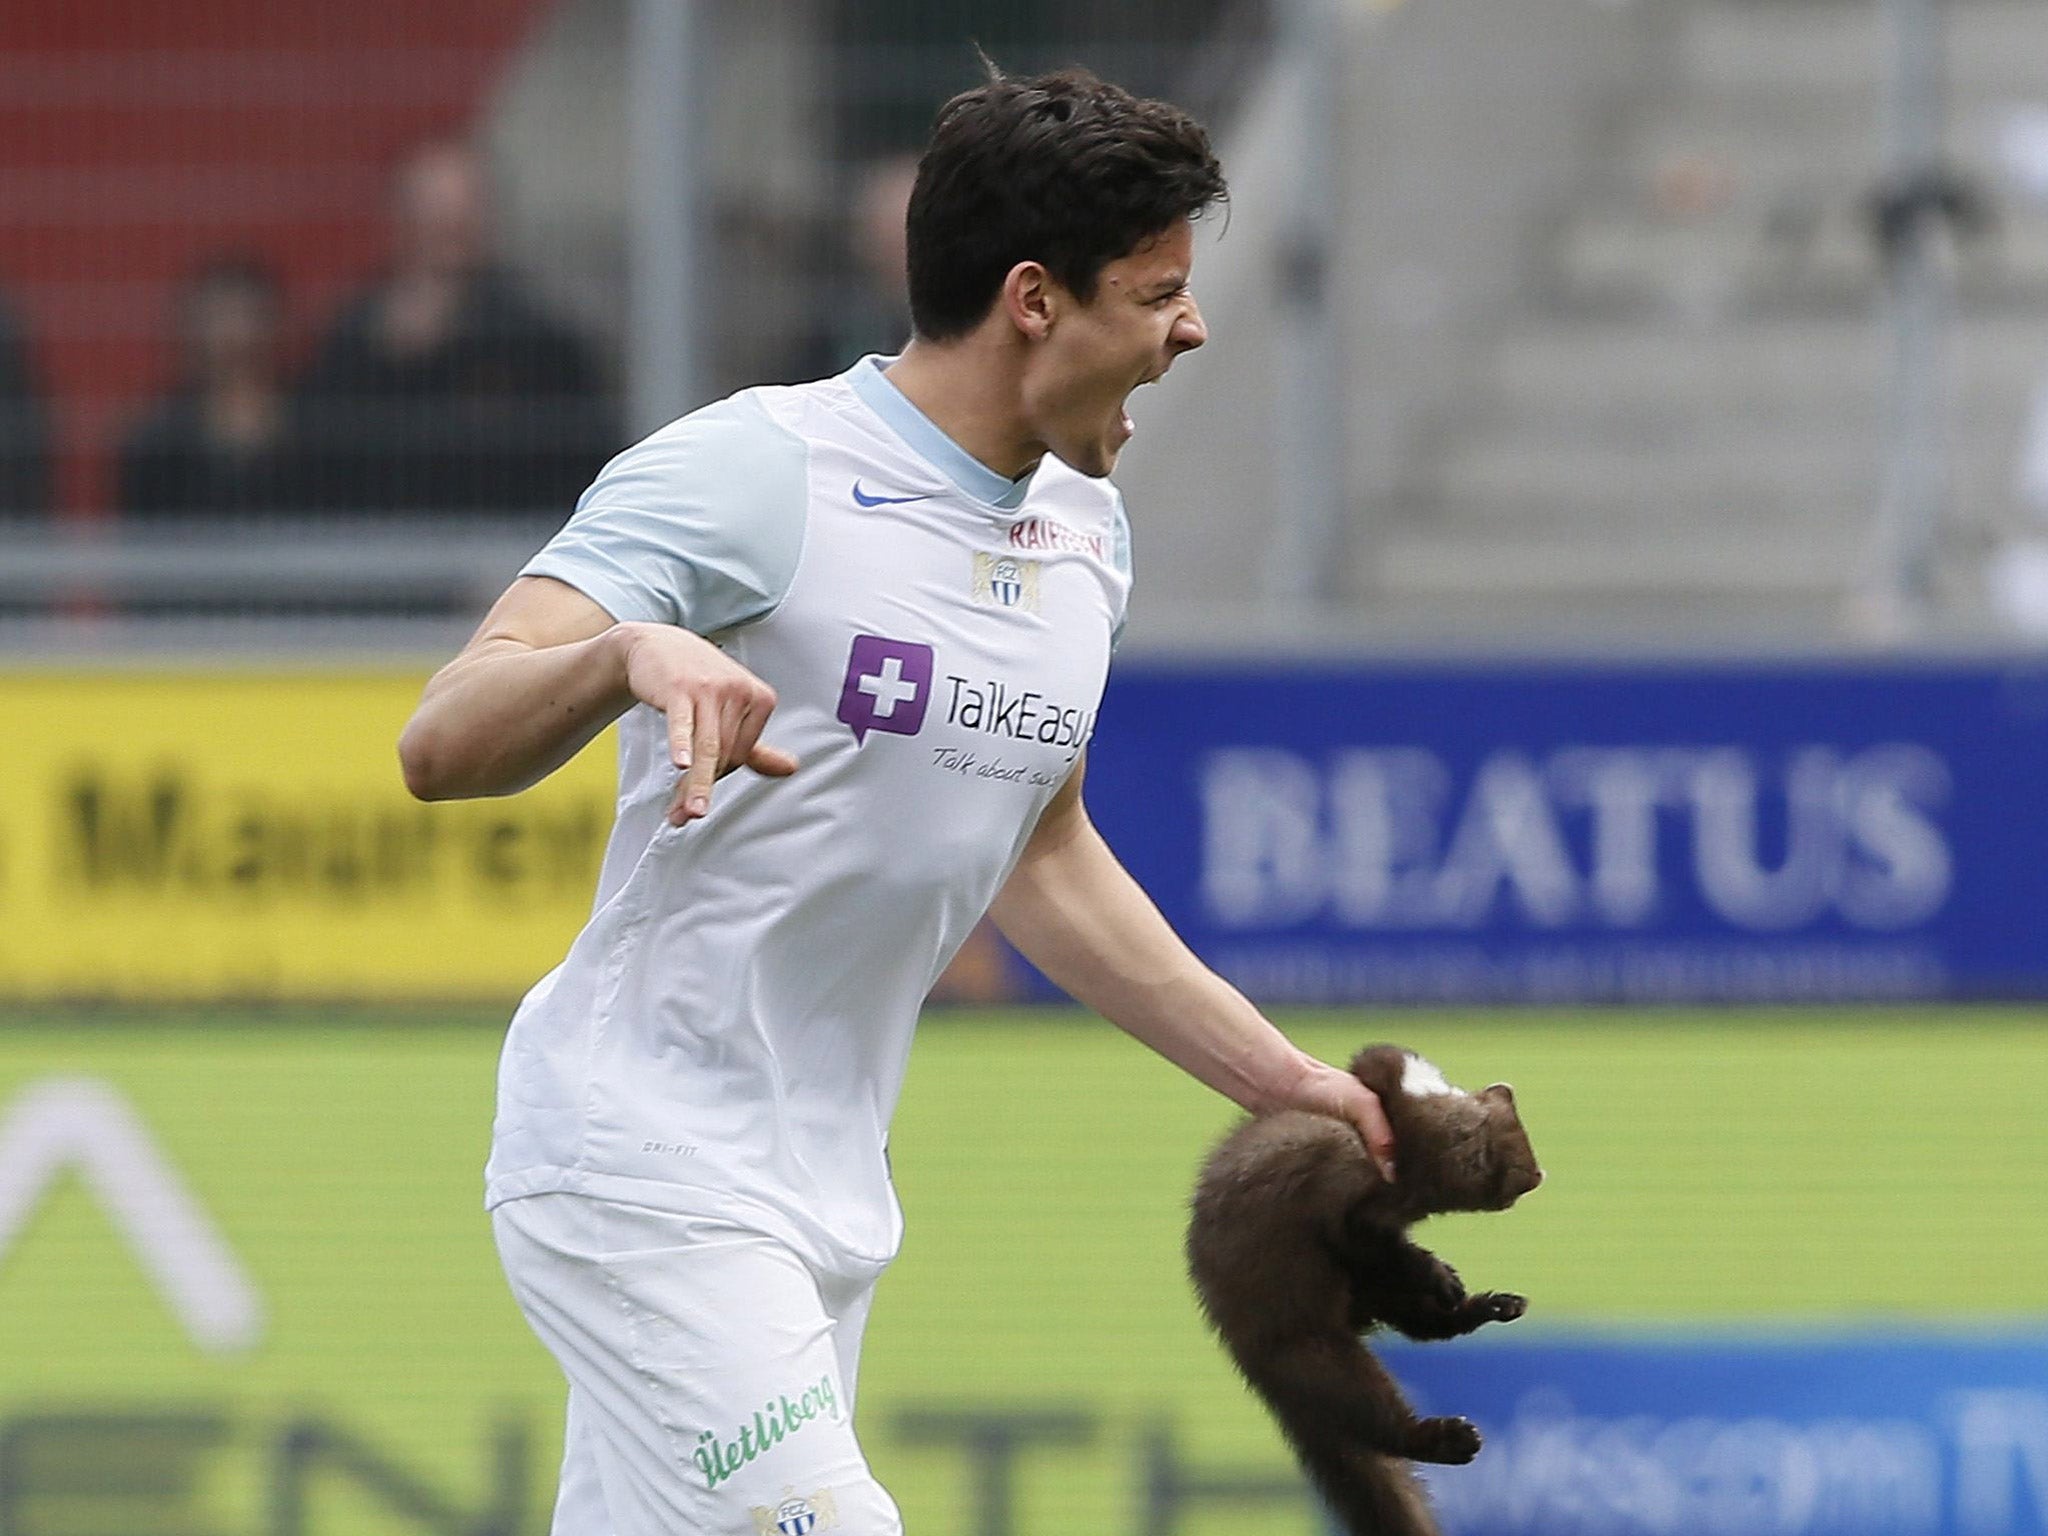 Zurich defender Loris Benito caught the pine marten but ended up getting bitten on the finger